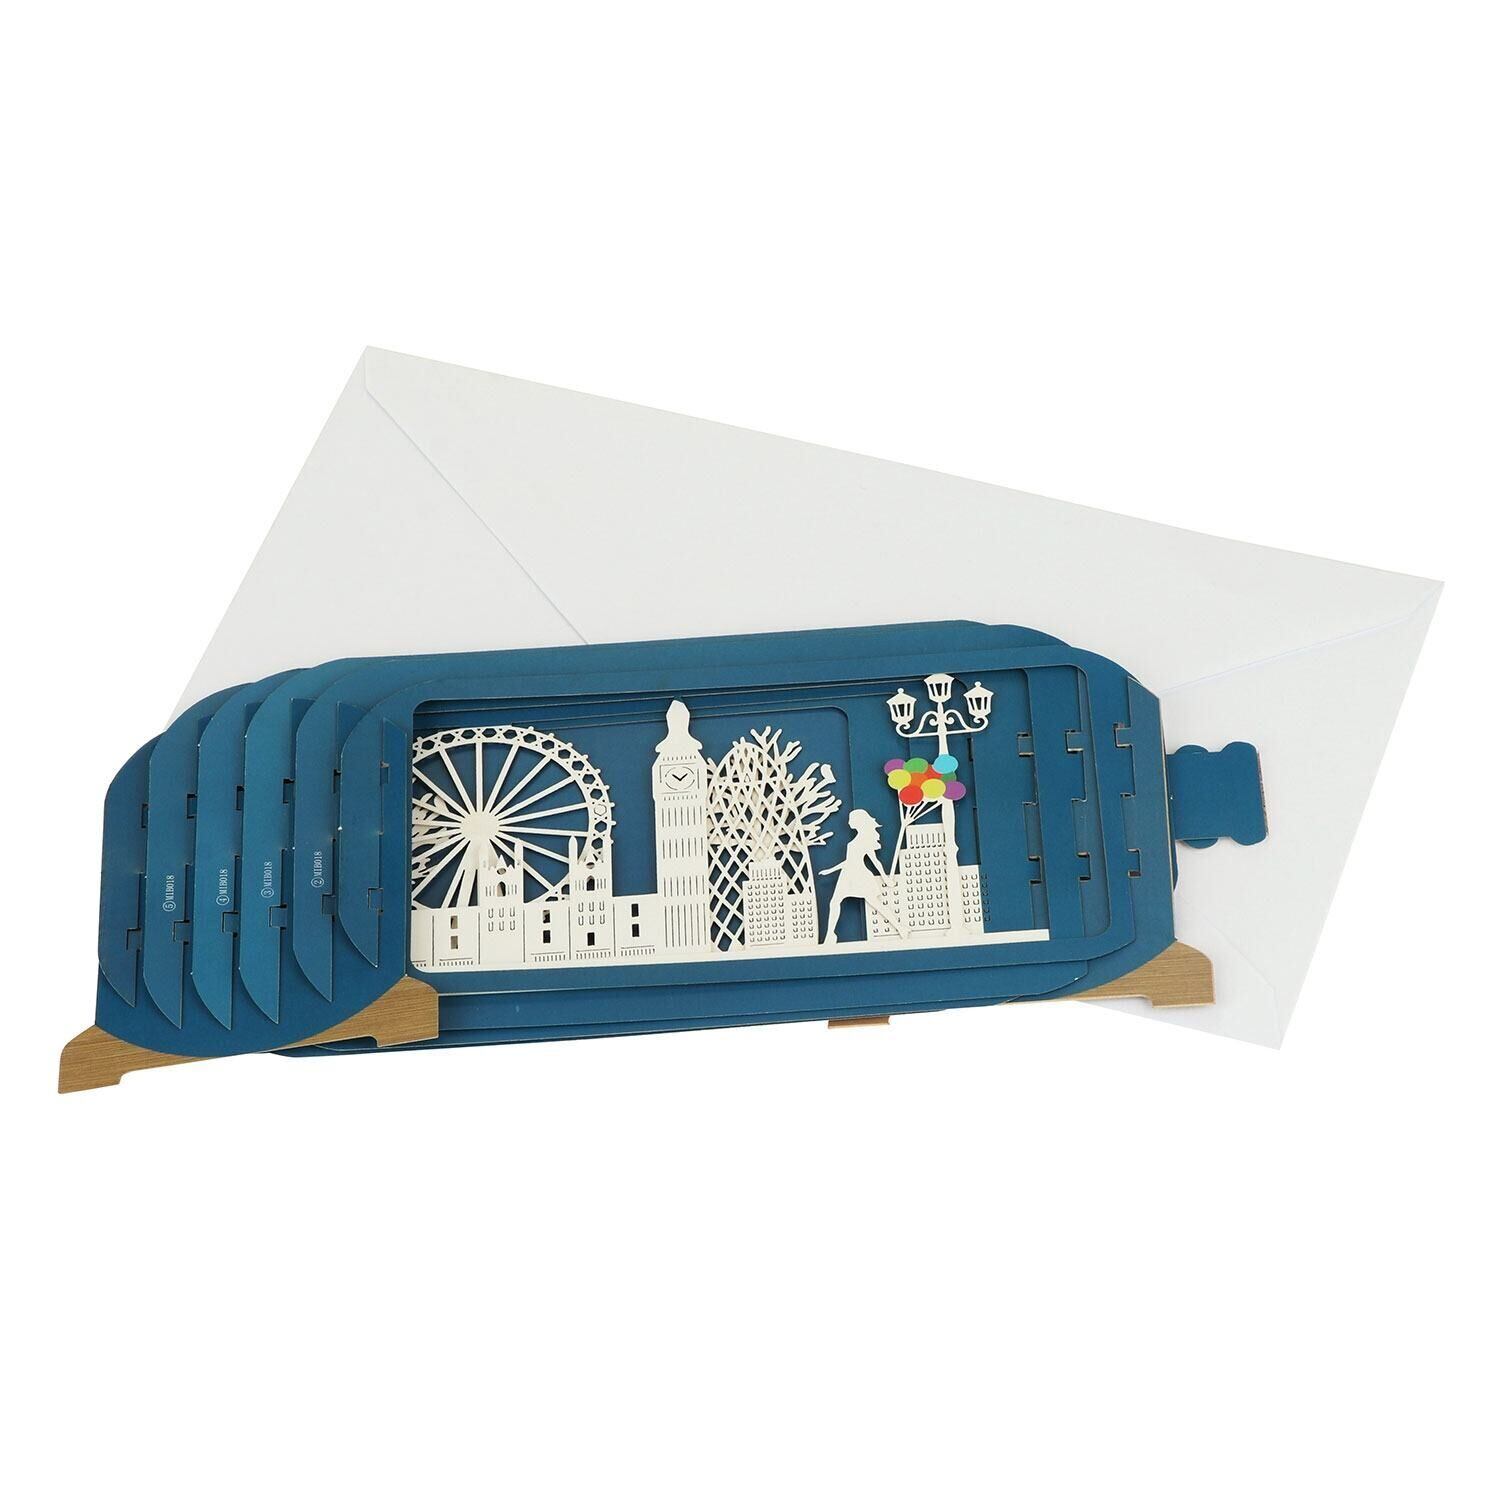 『Alljoy Design』ロンドンシーン３Dカード London Message in a Bottle Card London Message in a Bottle Card イギリスより